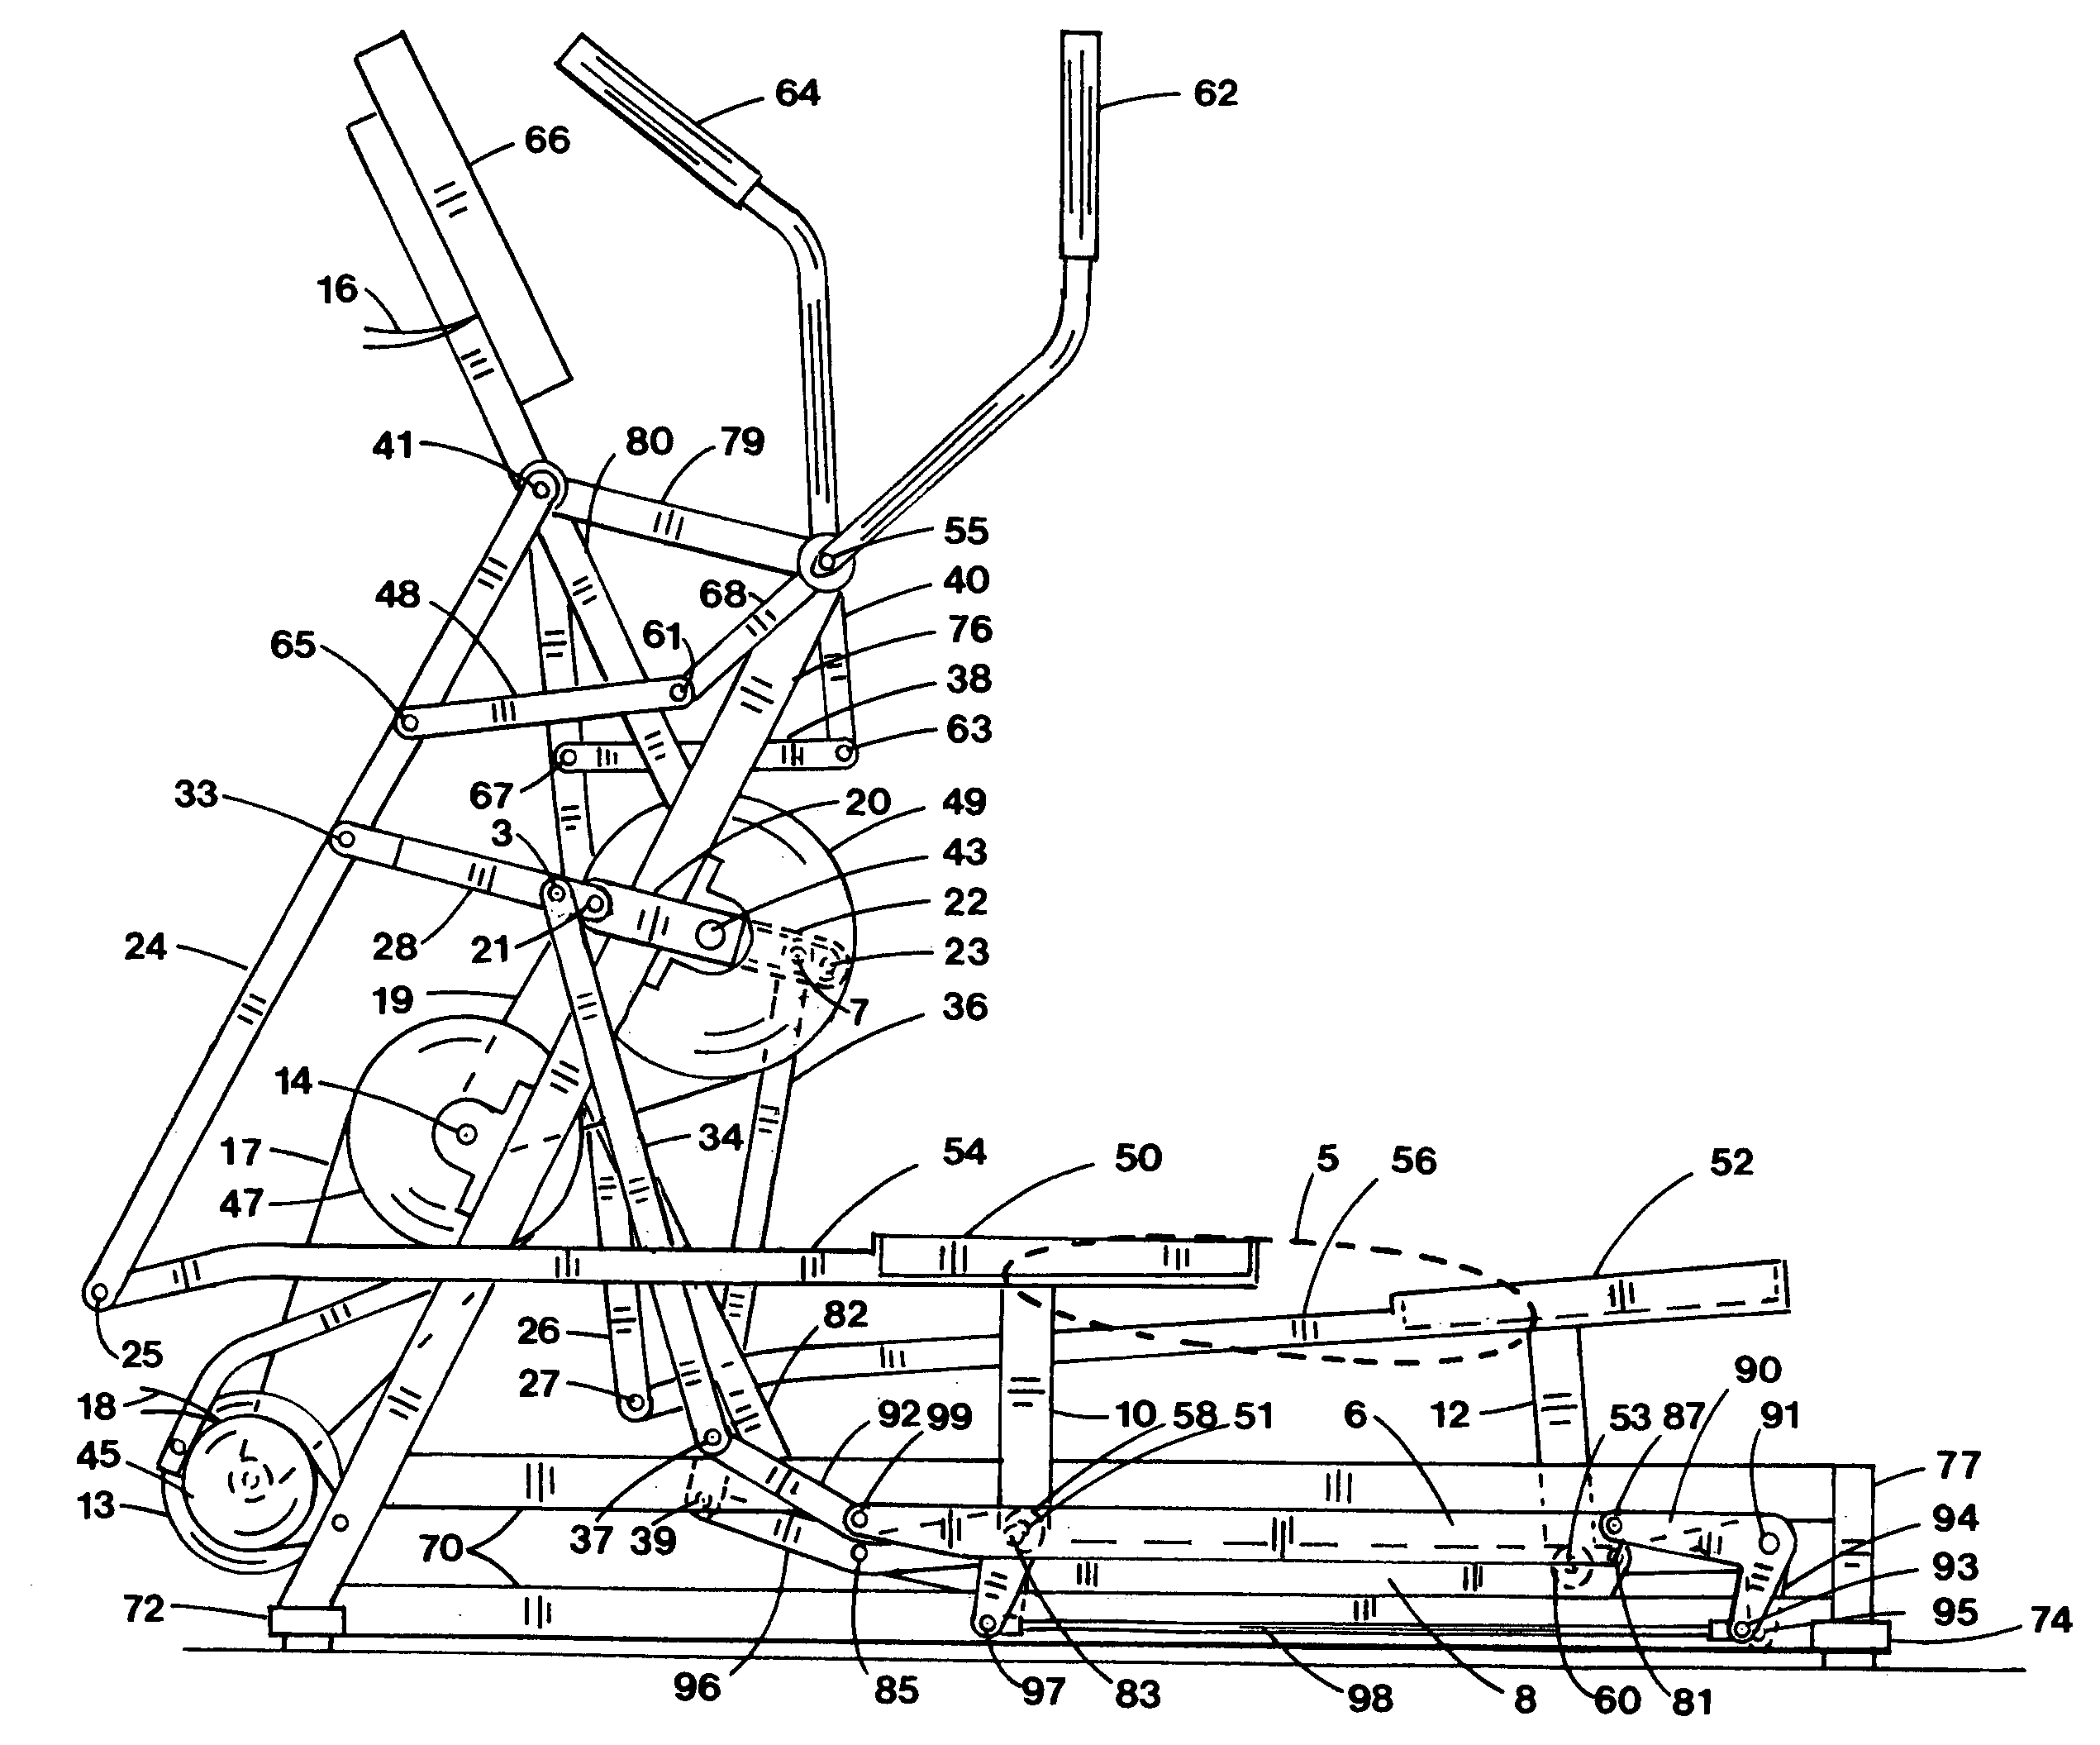 Elliptical exercise apparatus with articulating track